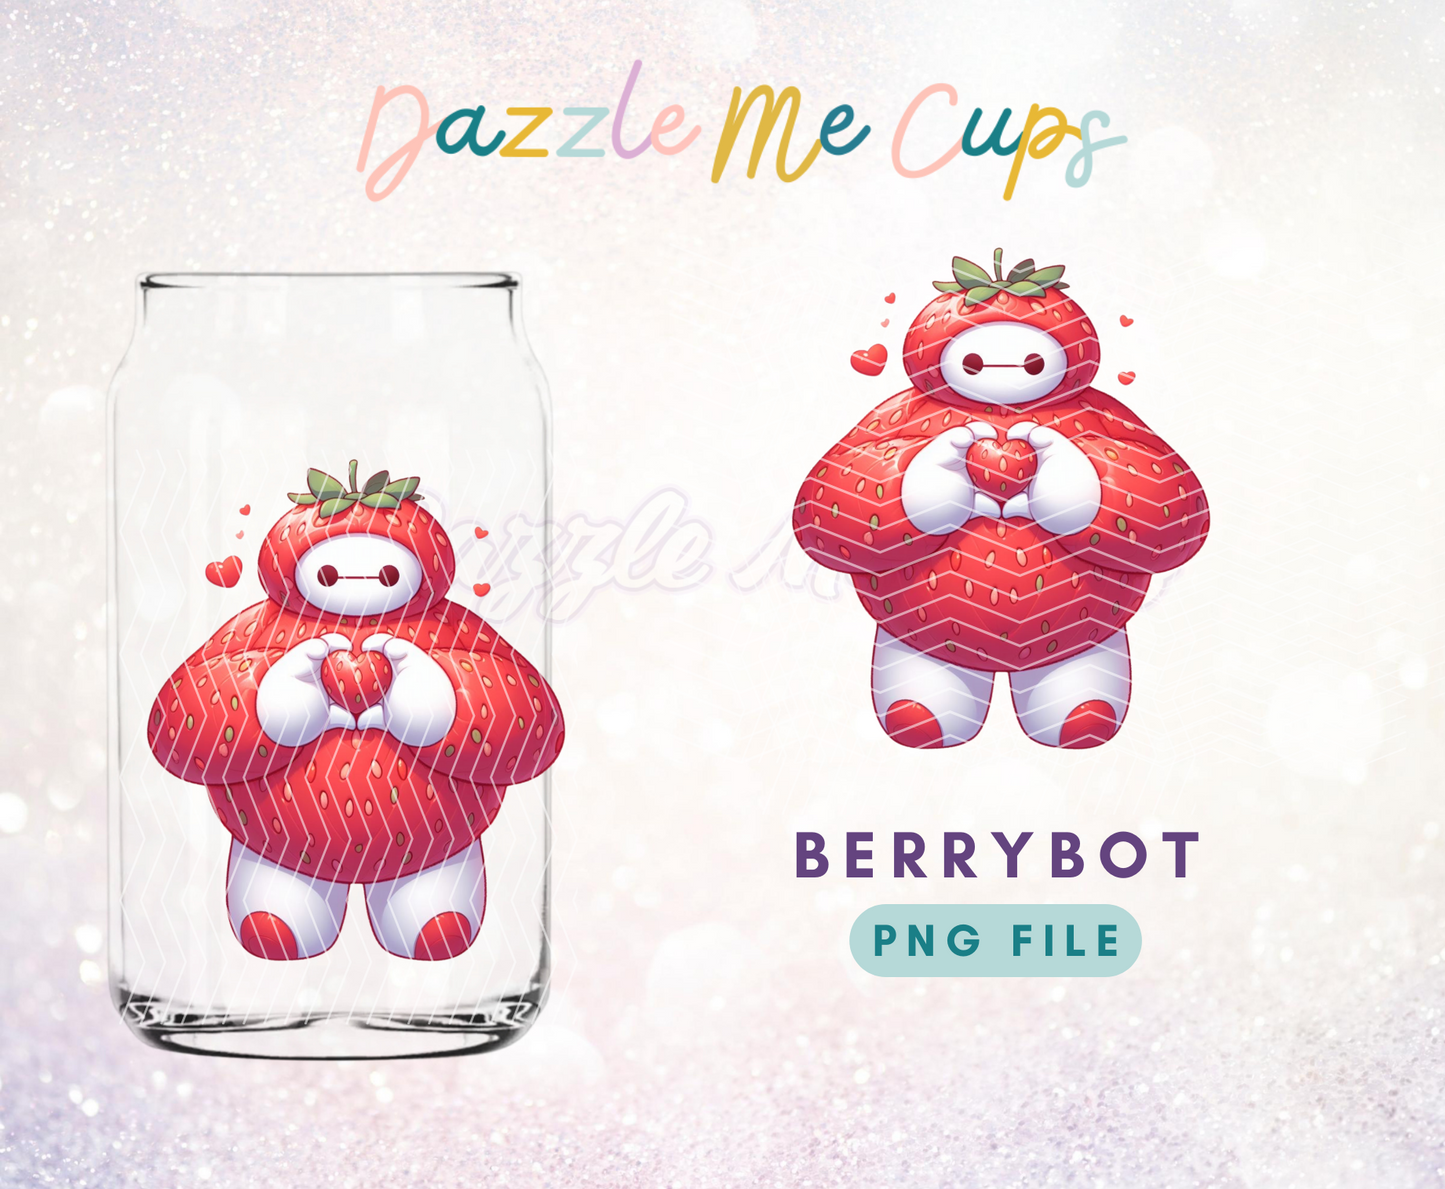 Berry bot PNG